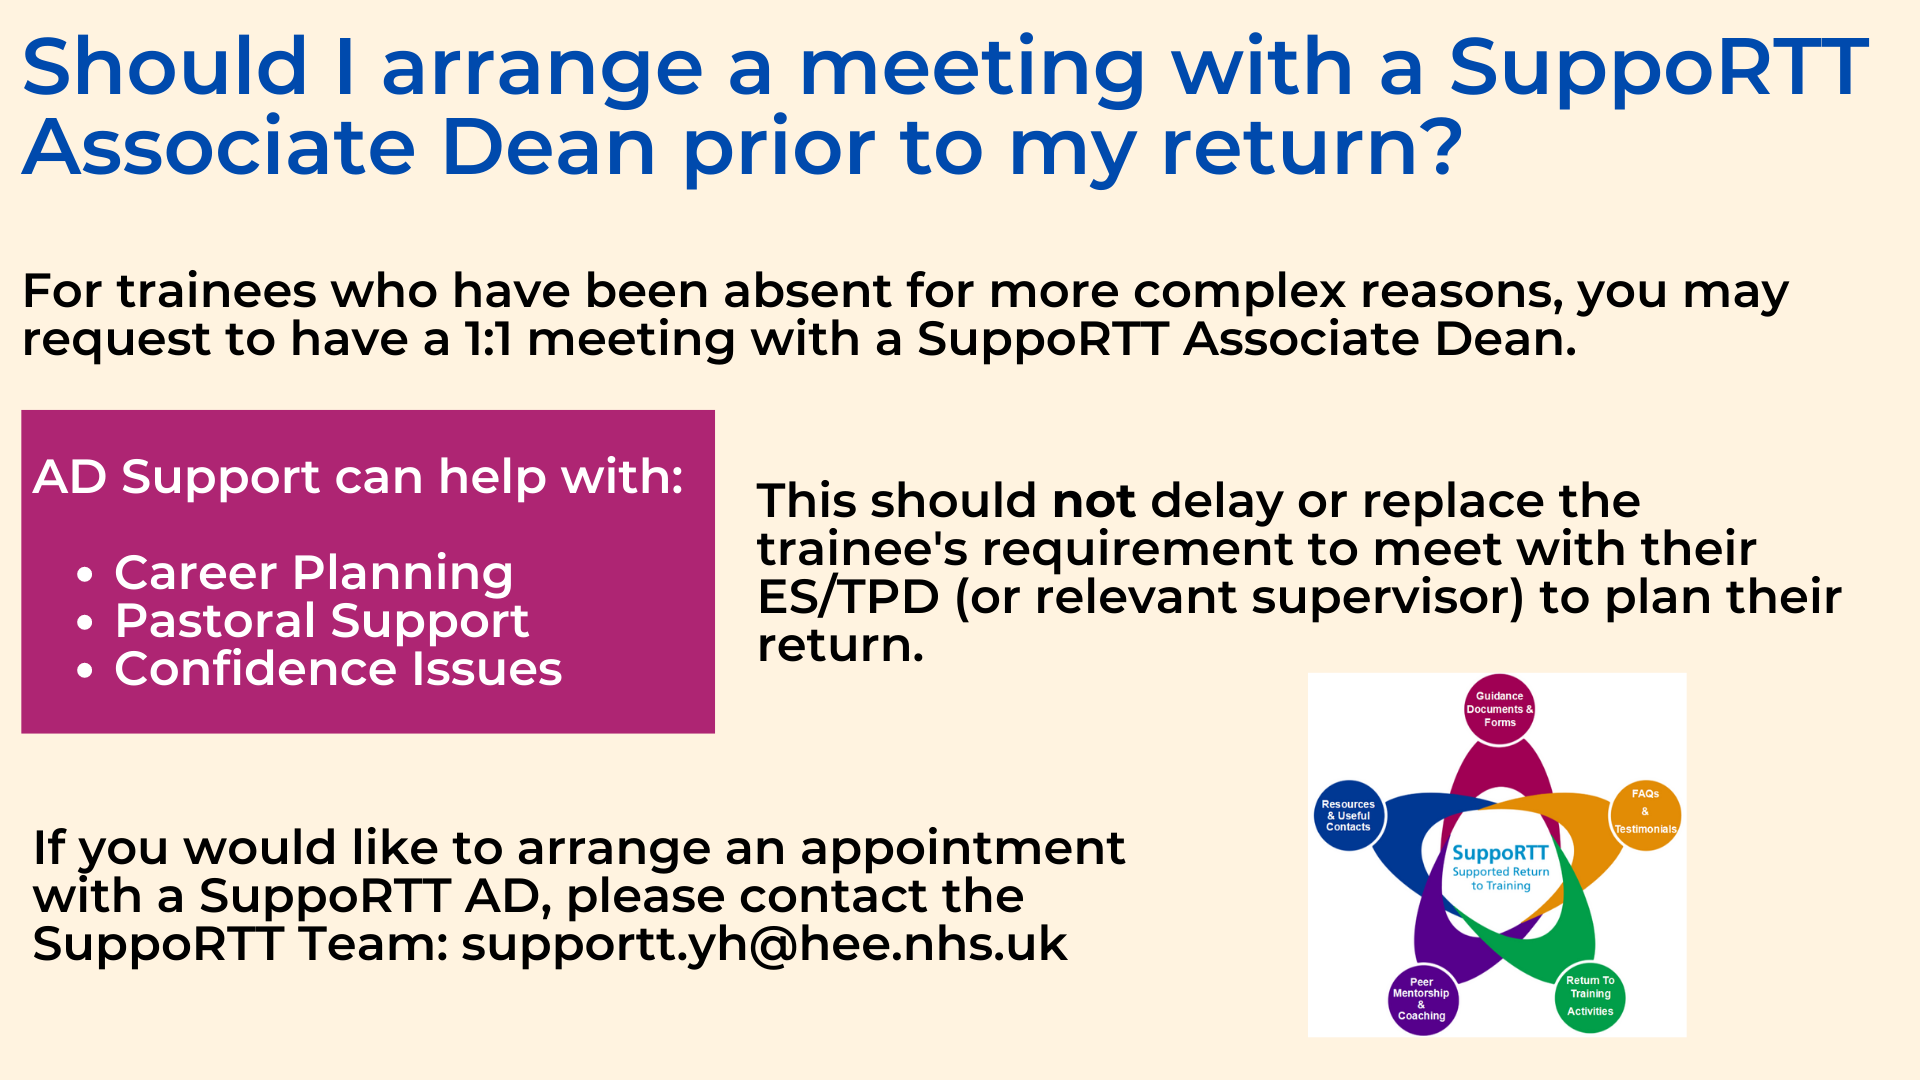 should_i_arrange_a_meeting_with_a_supportt_associate_dean_prior_to_my_return.png